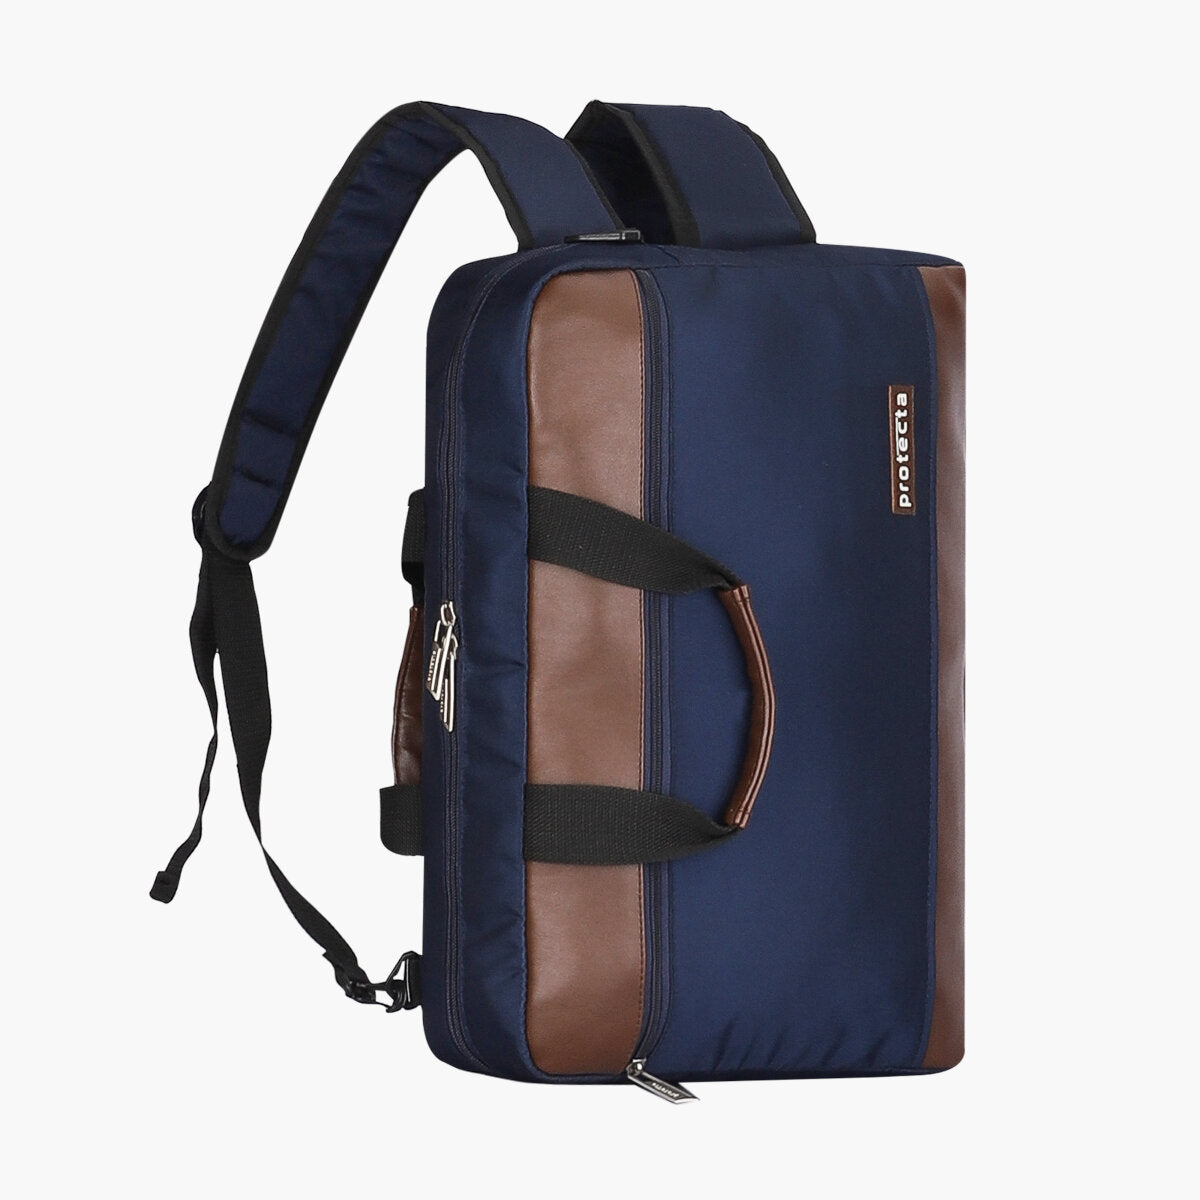 Navy | Protecta The Underdog Convertible Briefcase Backpack - 4